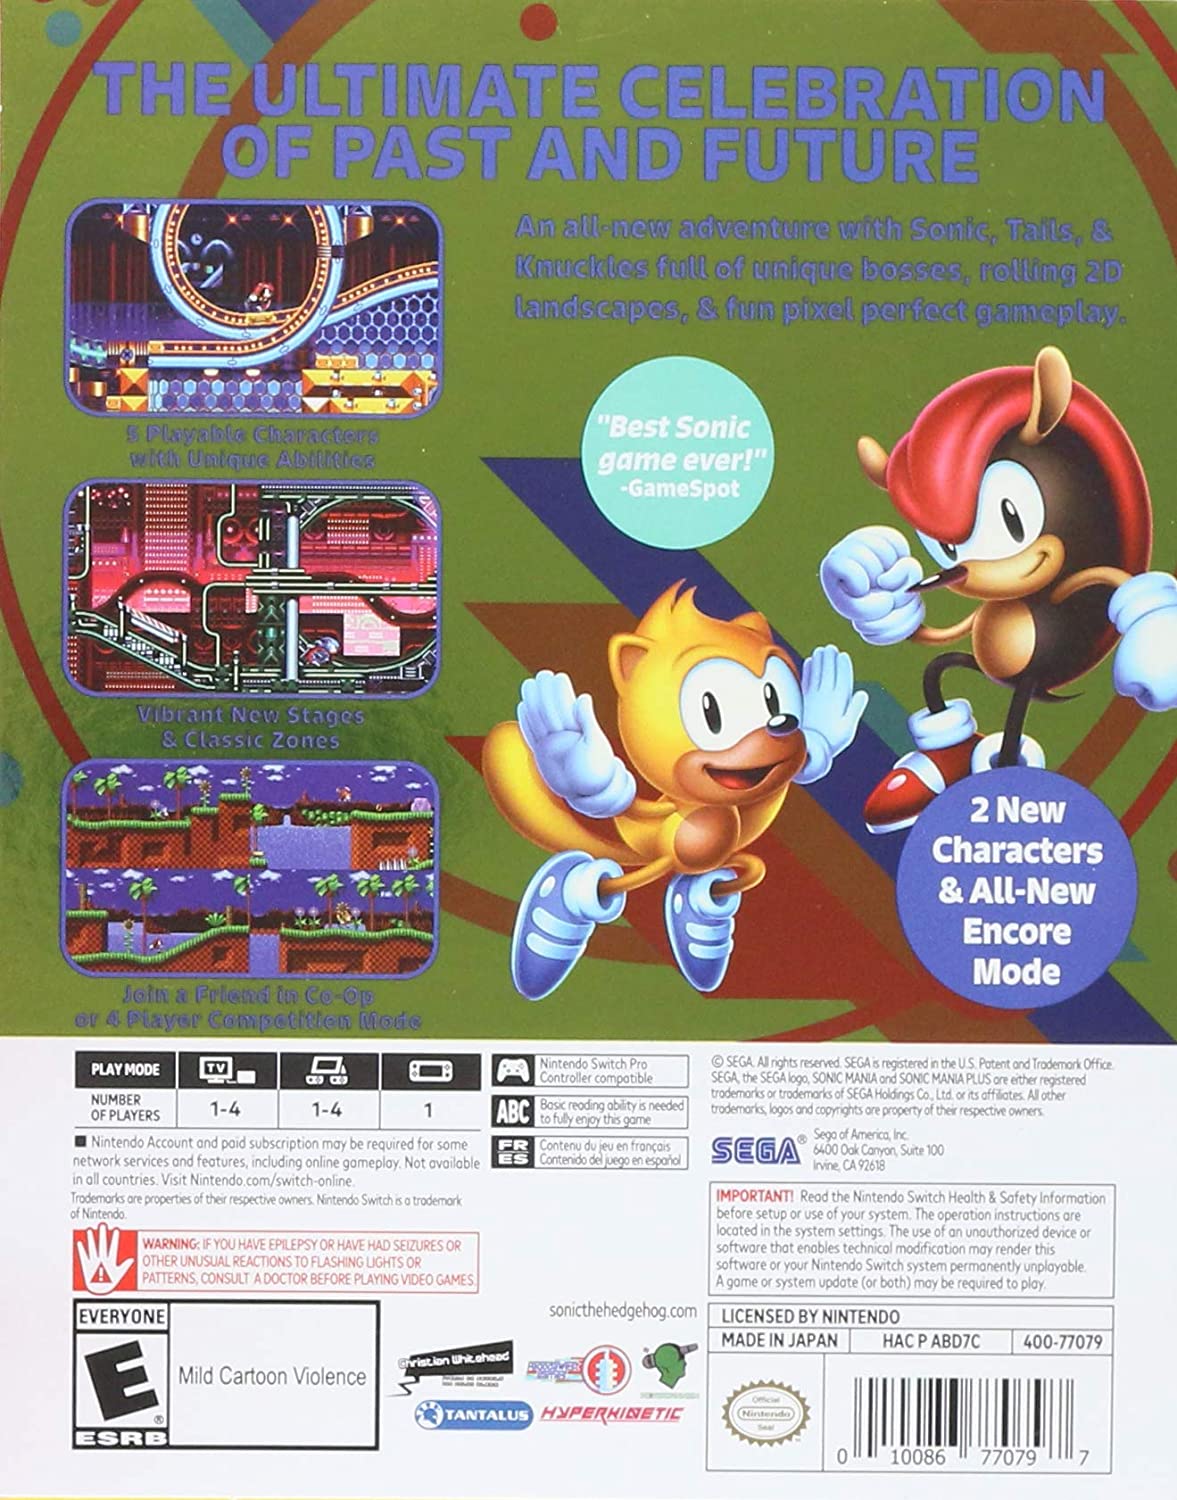 sonic mania switch game